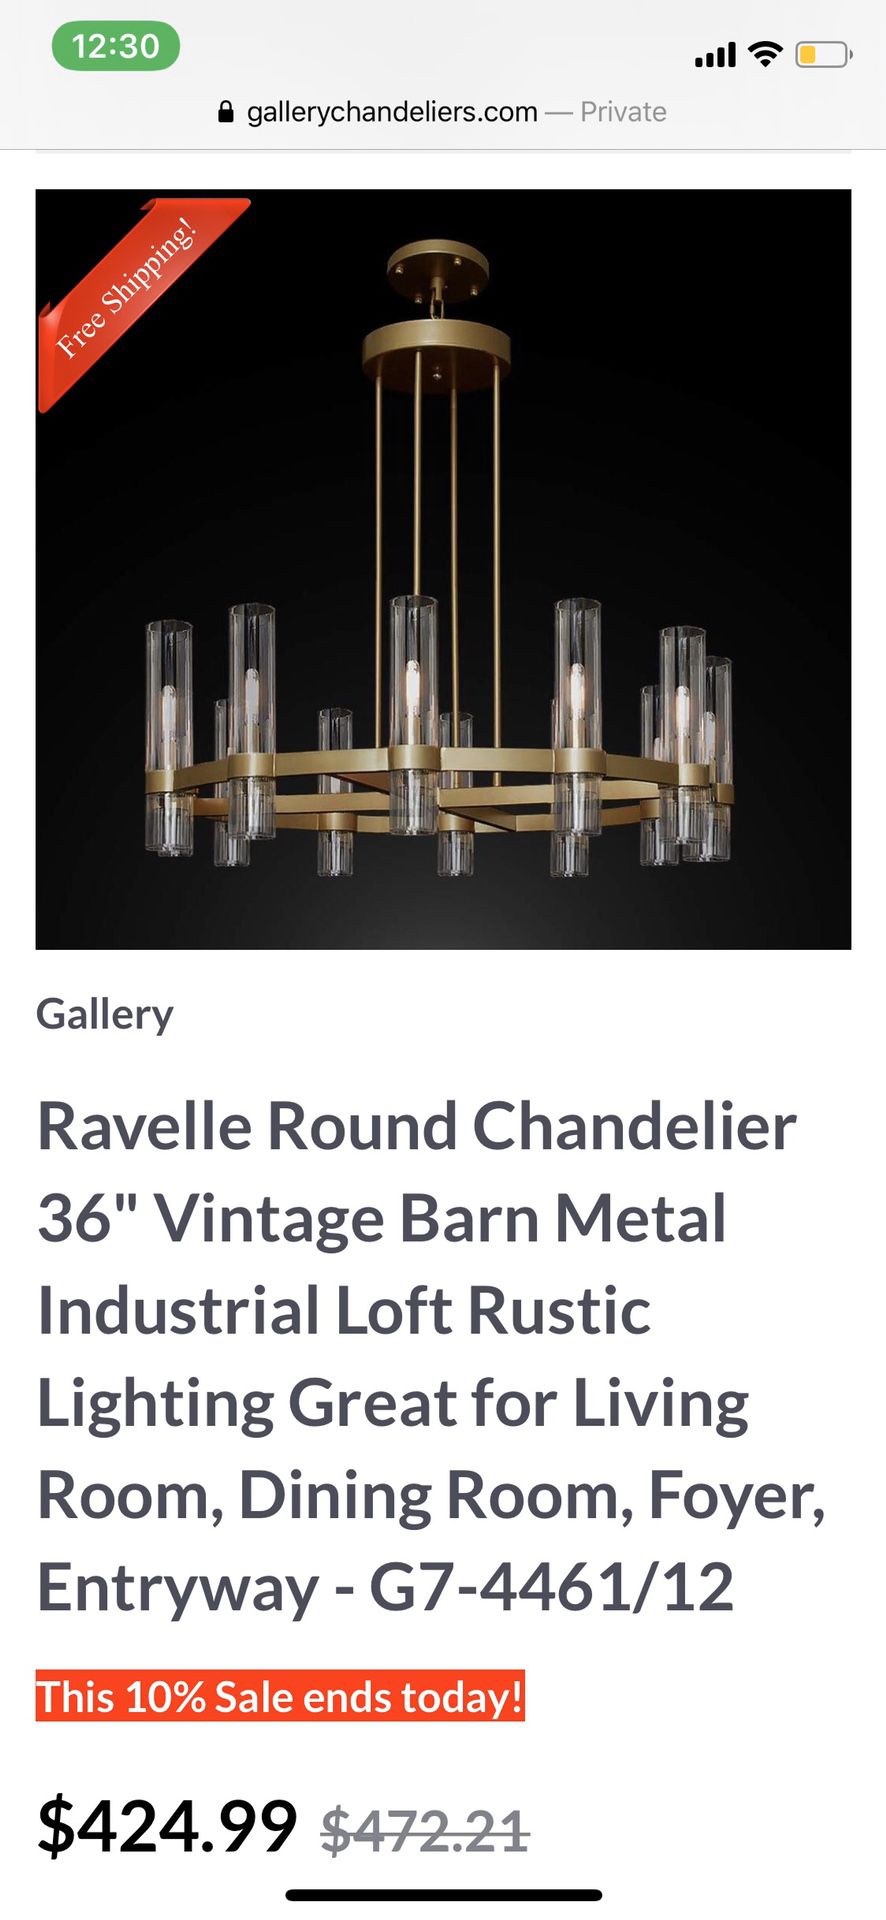 NEW! Chandelier - Still on Box !! Price Drop to $375 obo